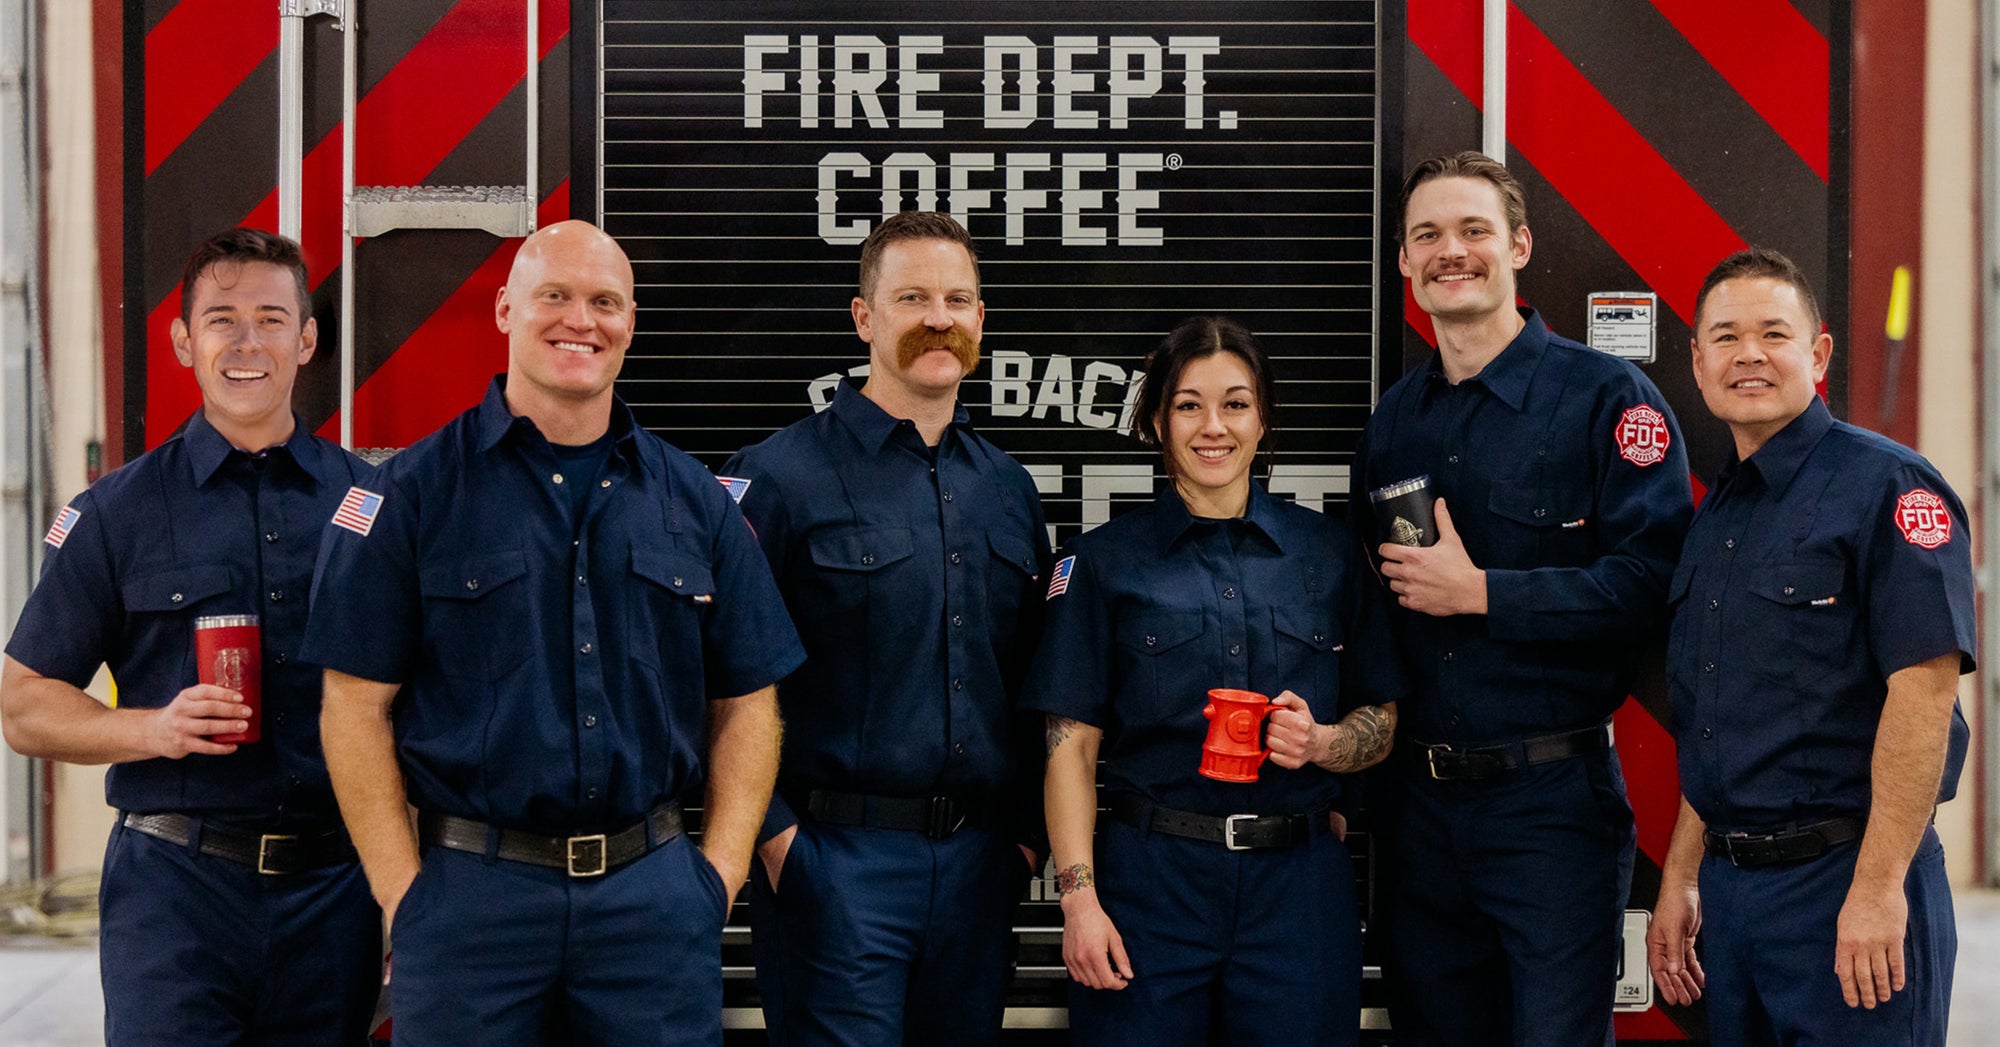 The Fire Dept. Coffee Video Team standing together behind a fire truck.